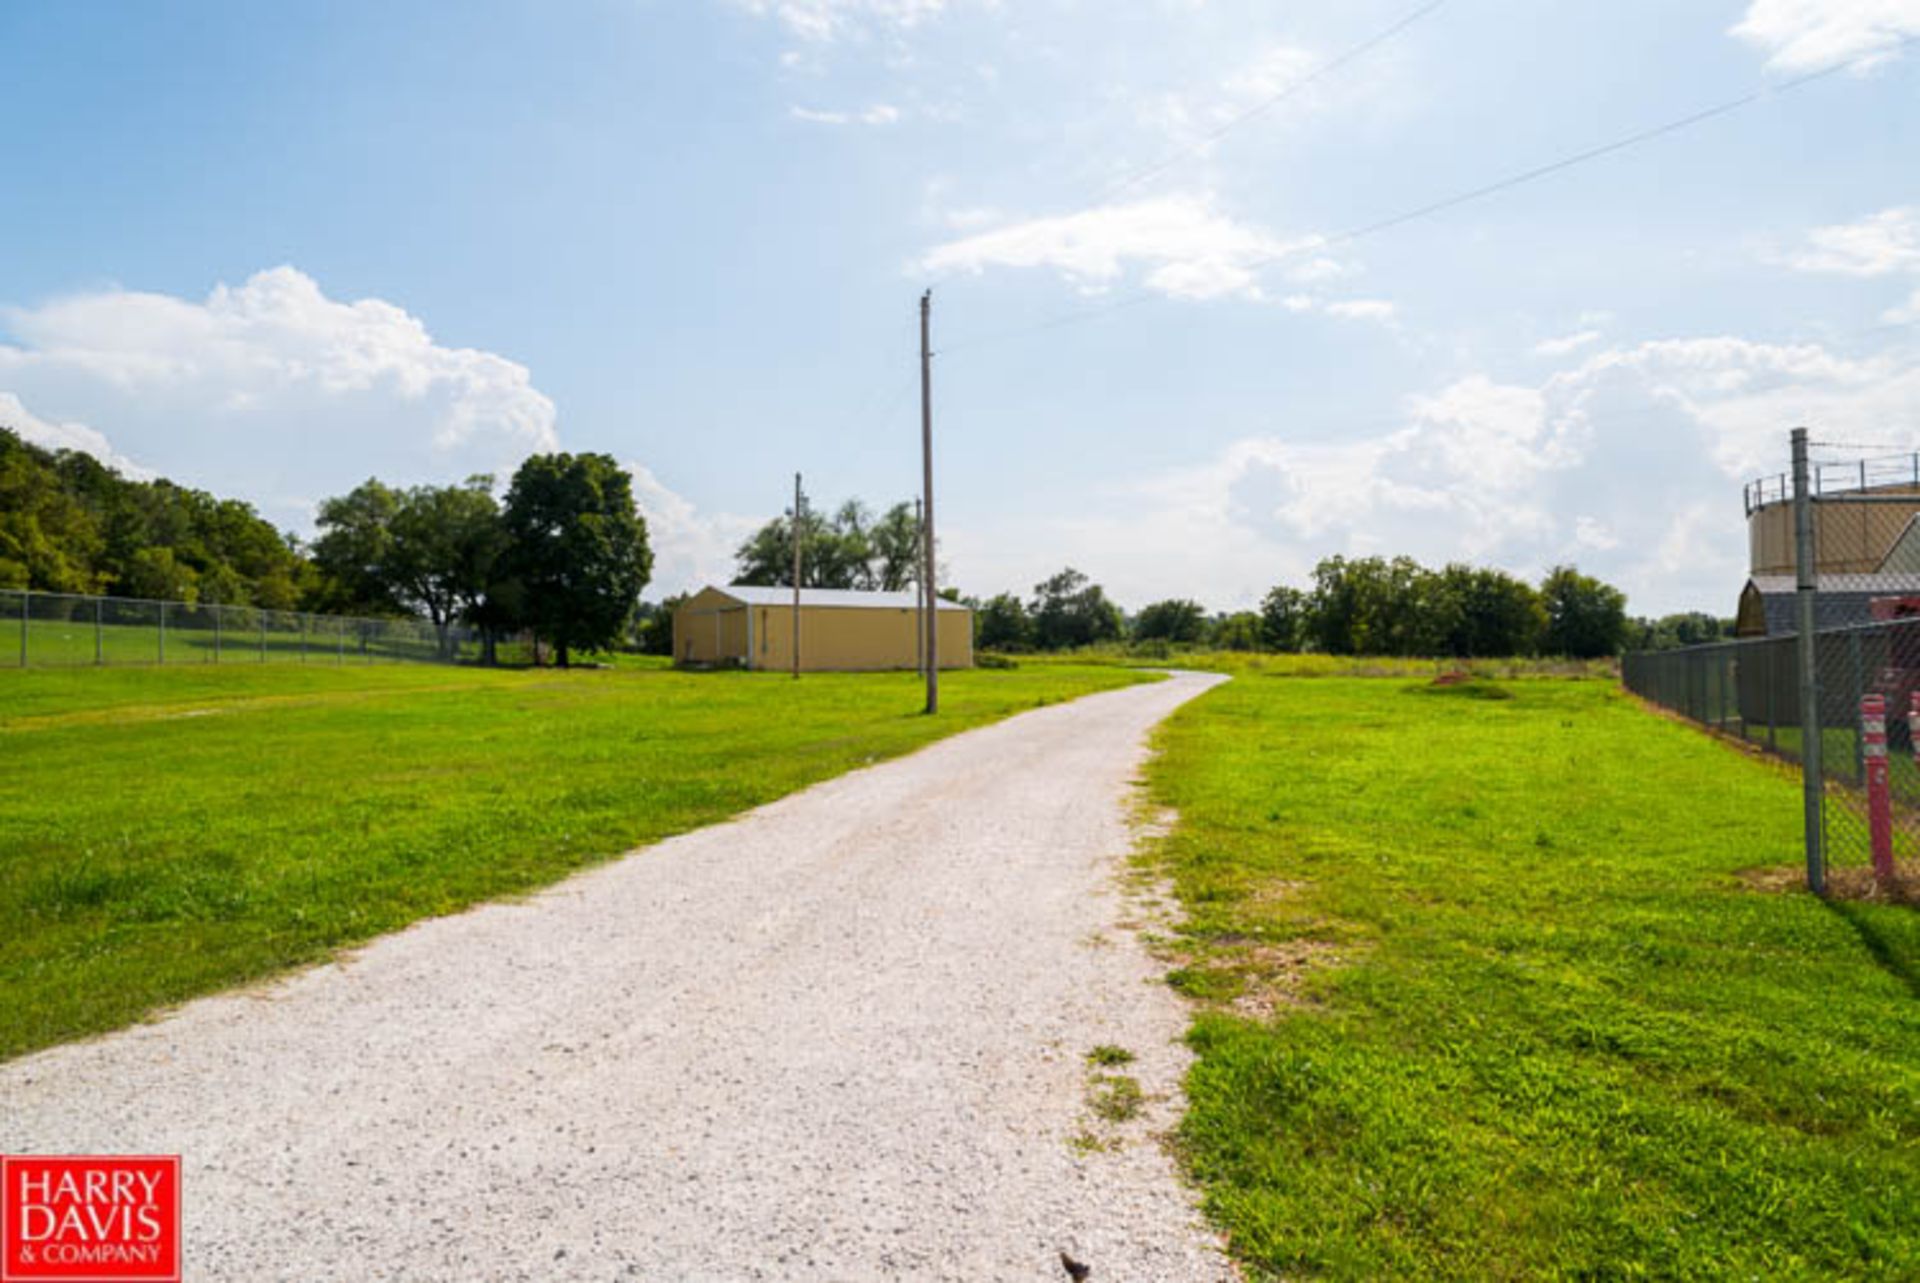 Real Estate - Former Dairy Processing Plant & Warehouse - 33 Acres - Image 11 of 27